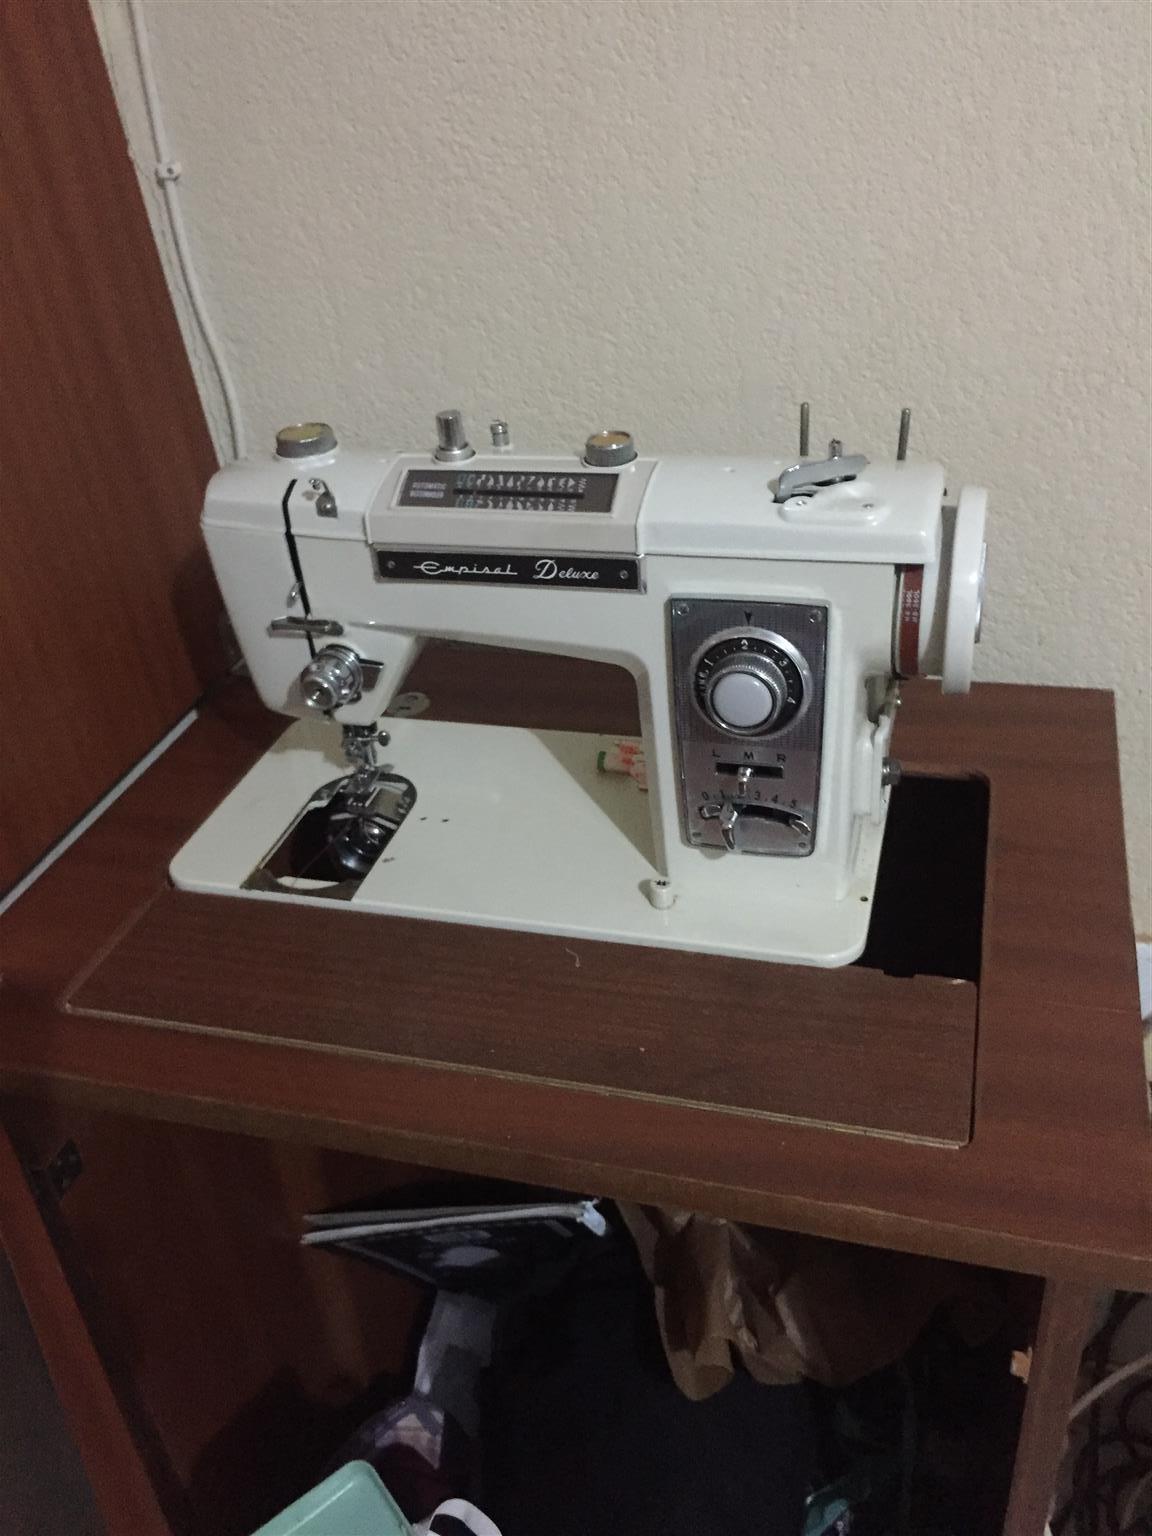 Sewing machines 